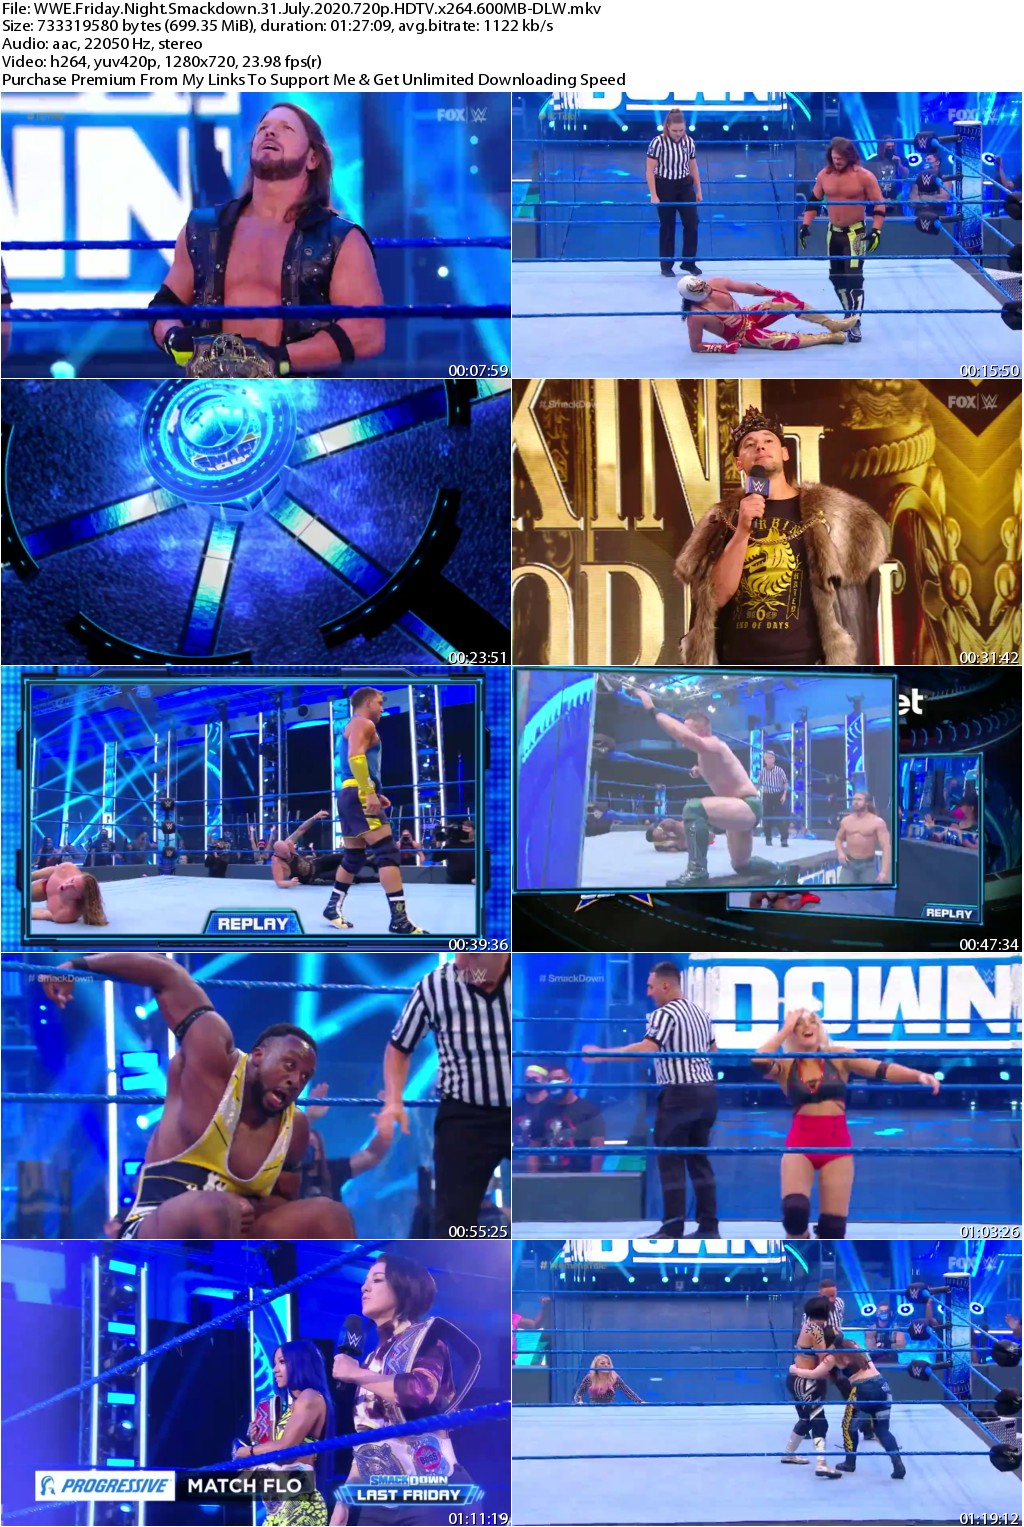 WWE Friday Night Smackdown 31 July 2020 720p HDTV x264 600MB-DLW